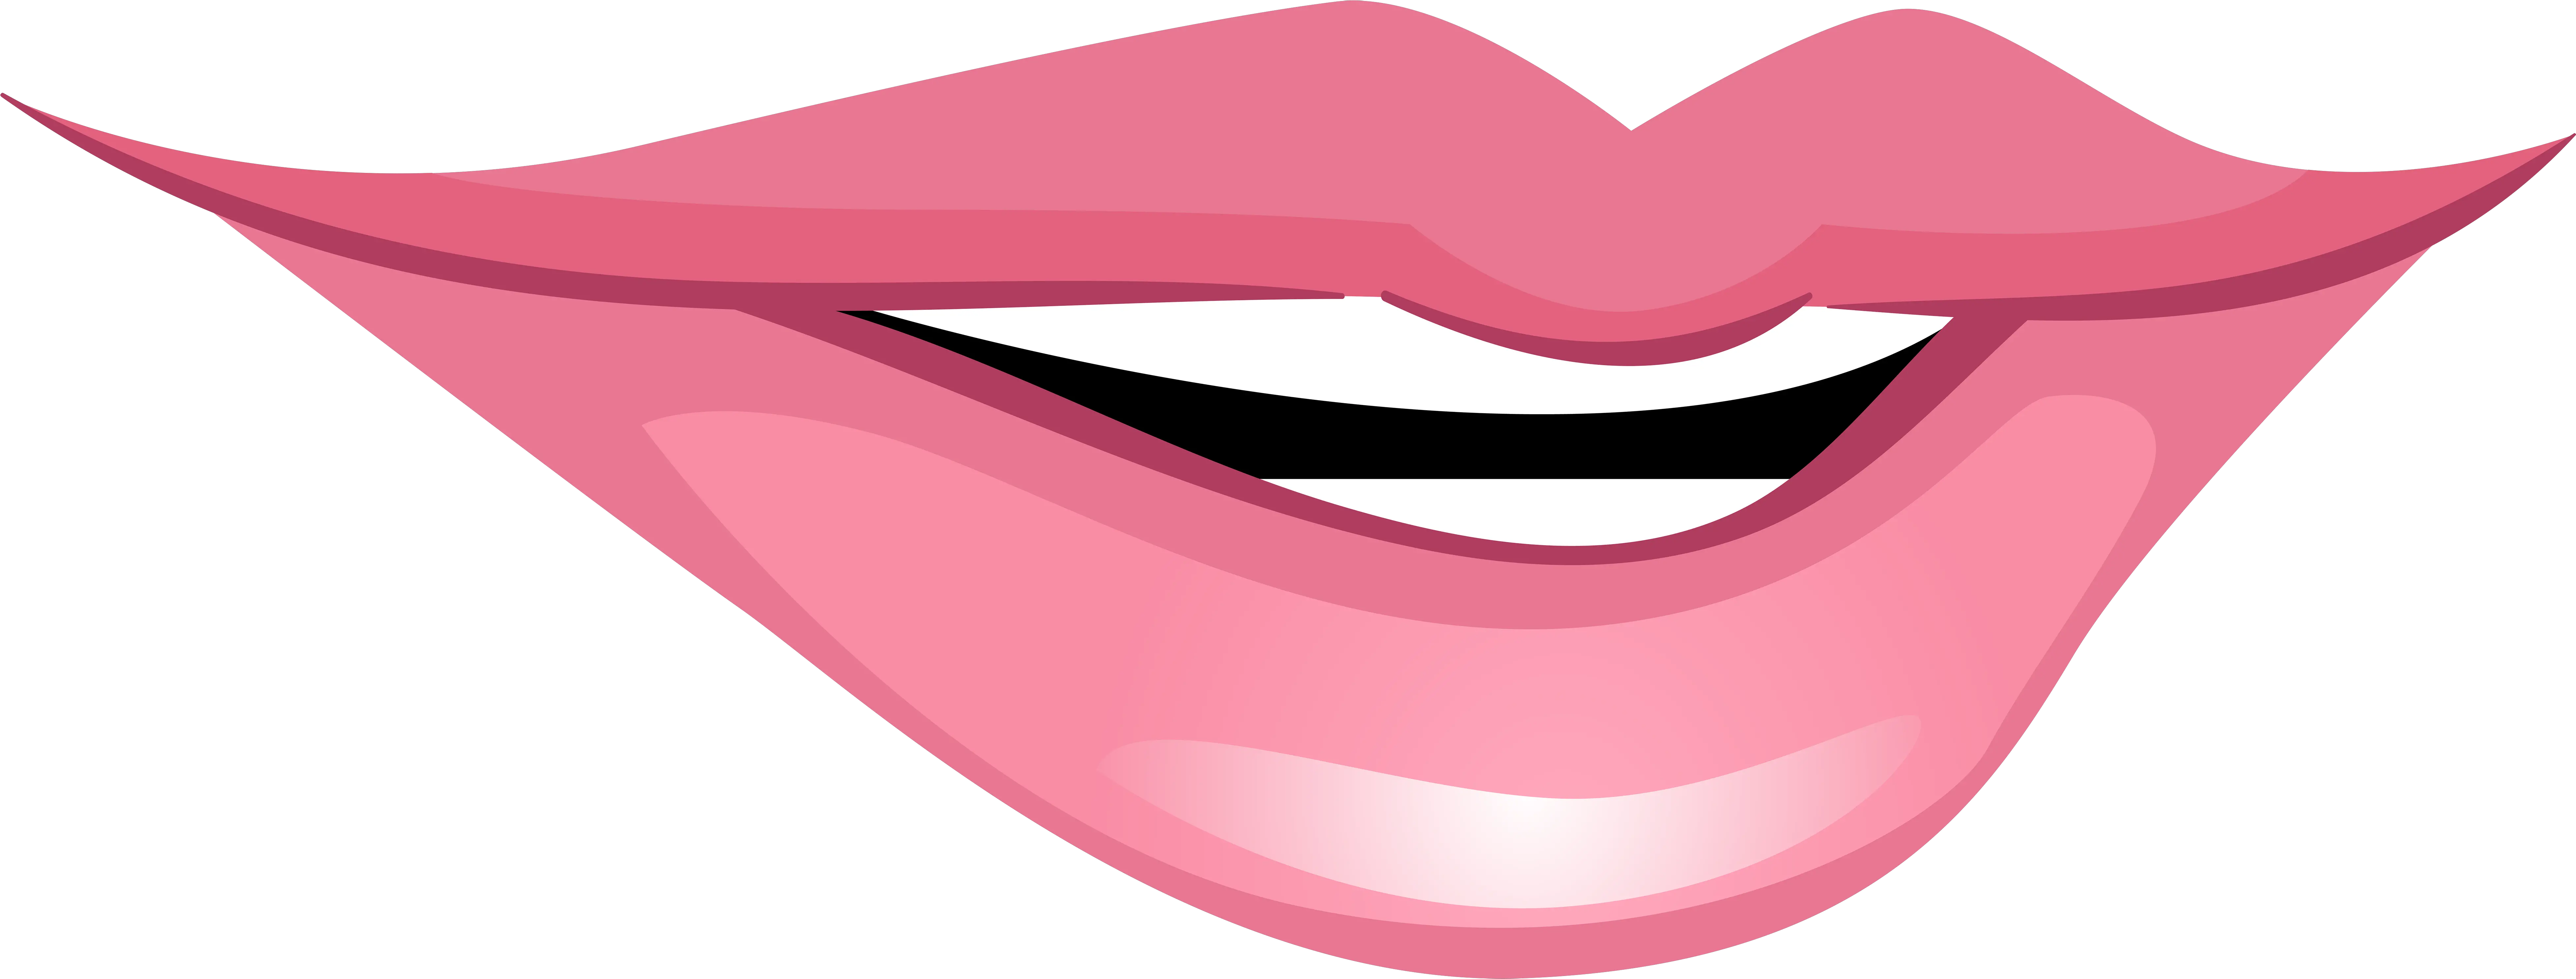 Lips Clipart Heart Clip Art Mouth Png Lips Clipart Png